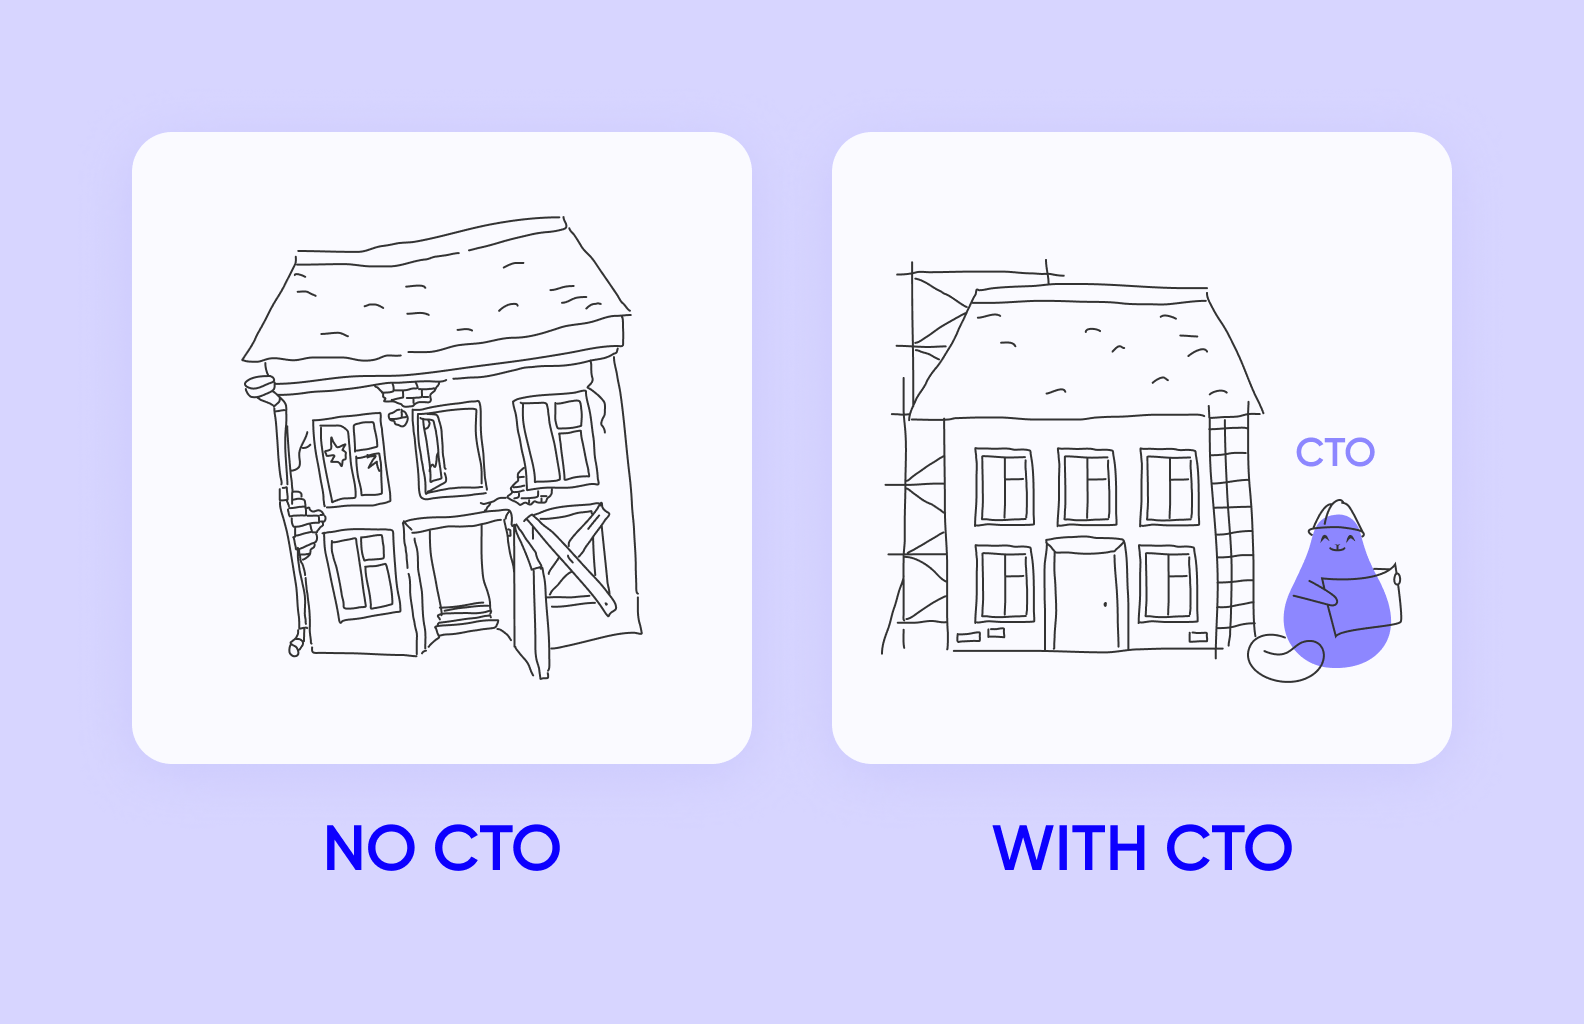 Development with and without CTO